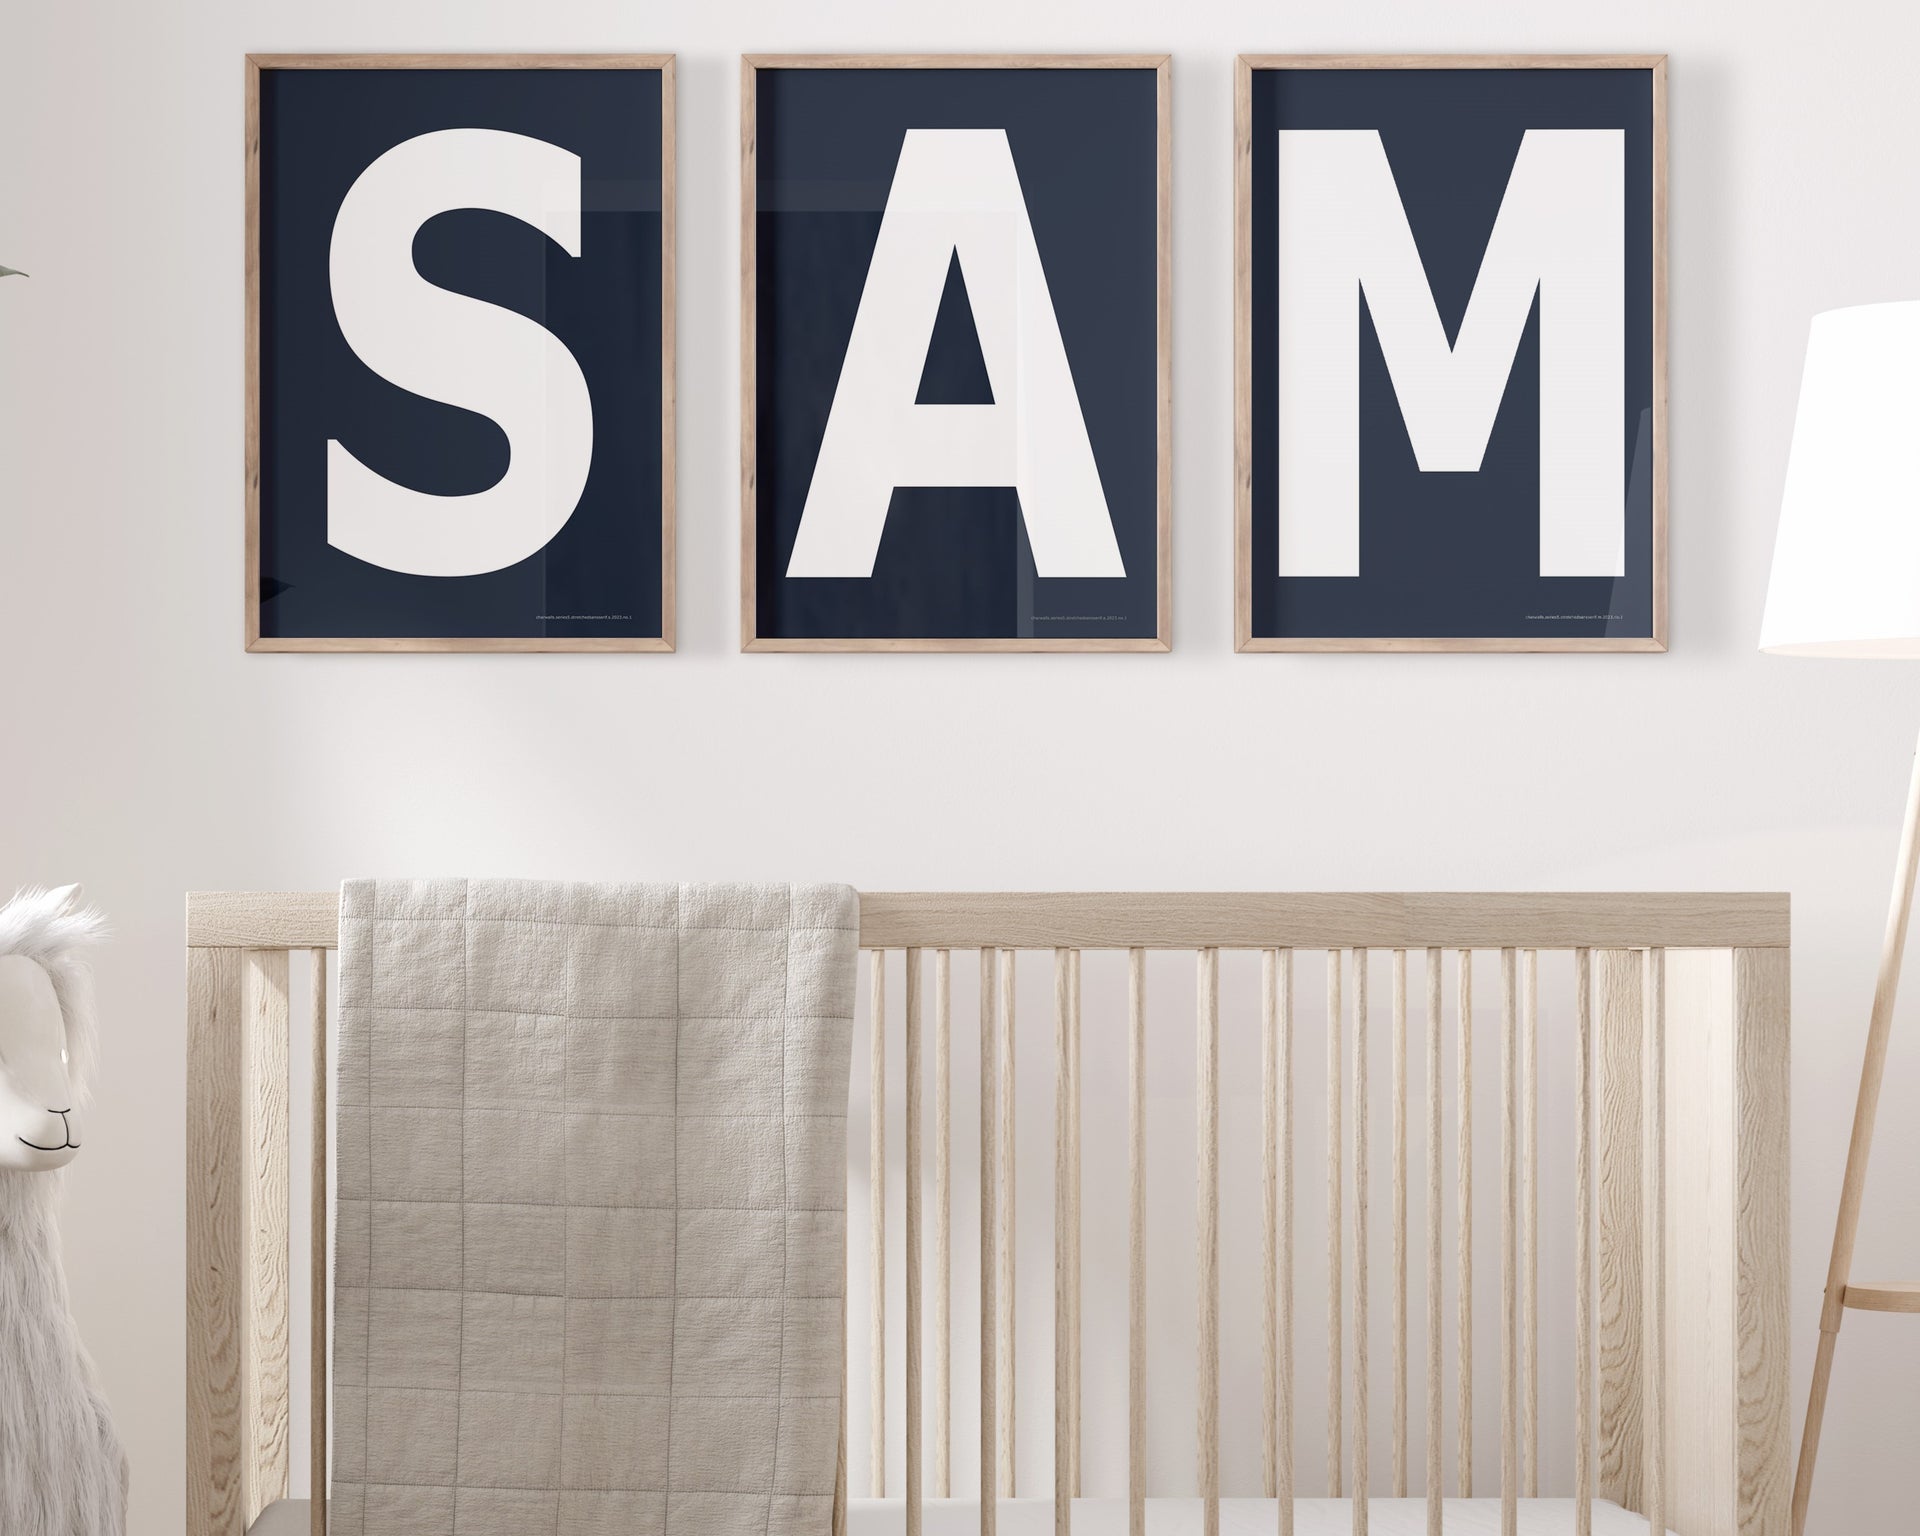 Three framed navy blue and white letter art prints spelling out the name SAM hanging above a crib in a neutral nursery.